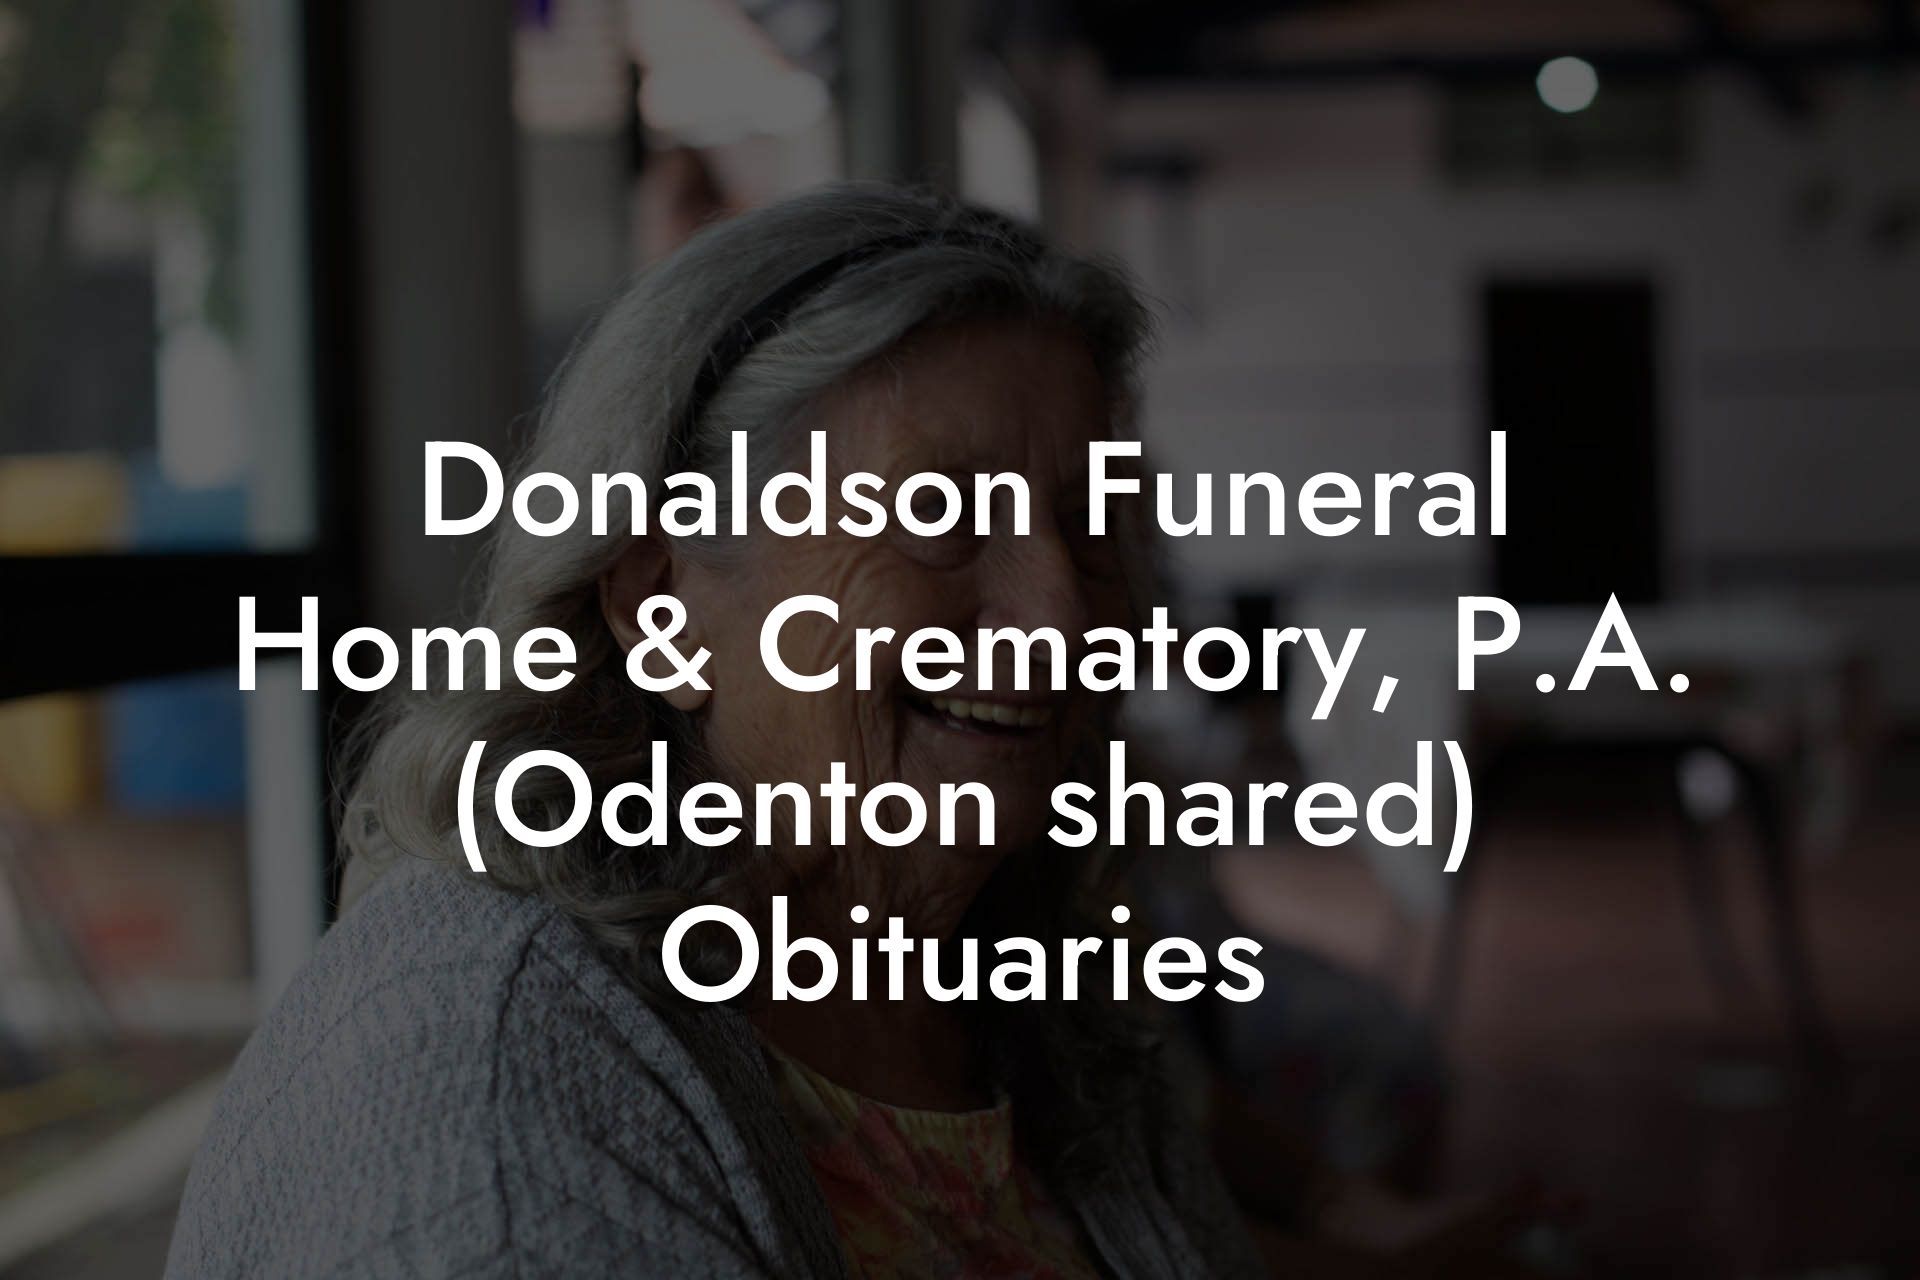 Donaldson Funeral Home & Crematory, P.A. (Odenton shared) Obituaries